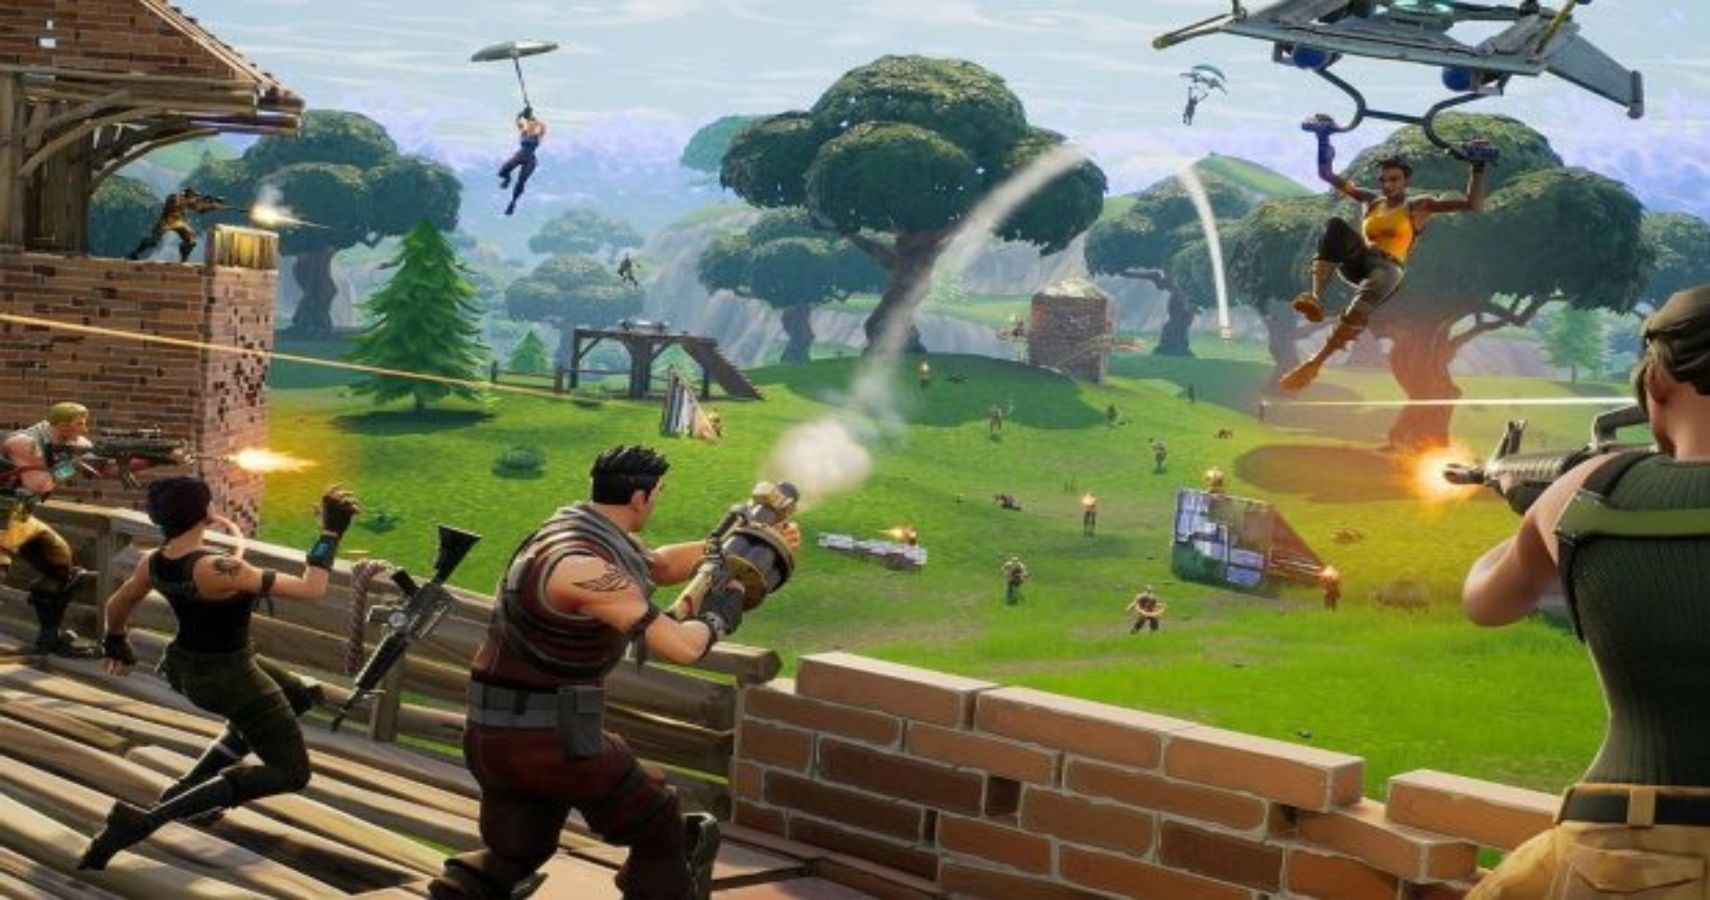 Epic Games Launches Lawsuit Against Organizers Of Failed Fortnite Live